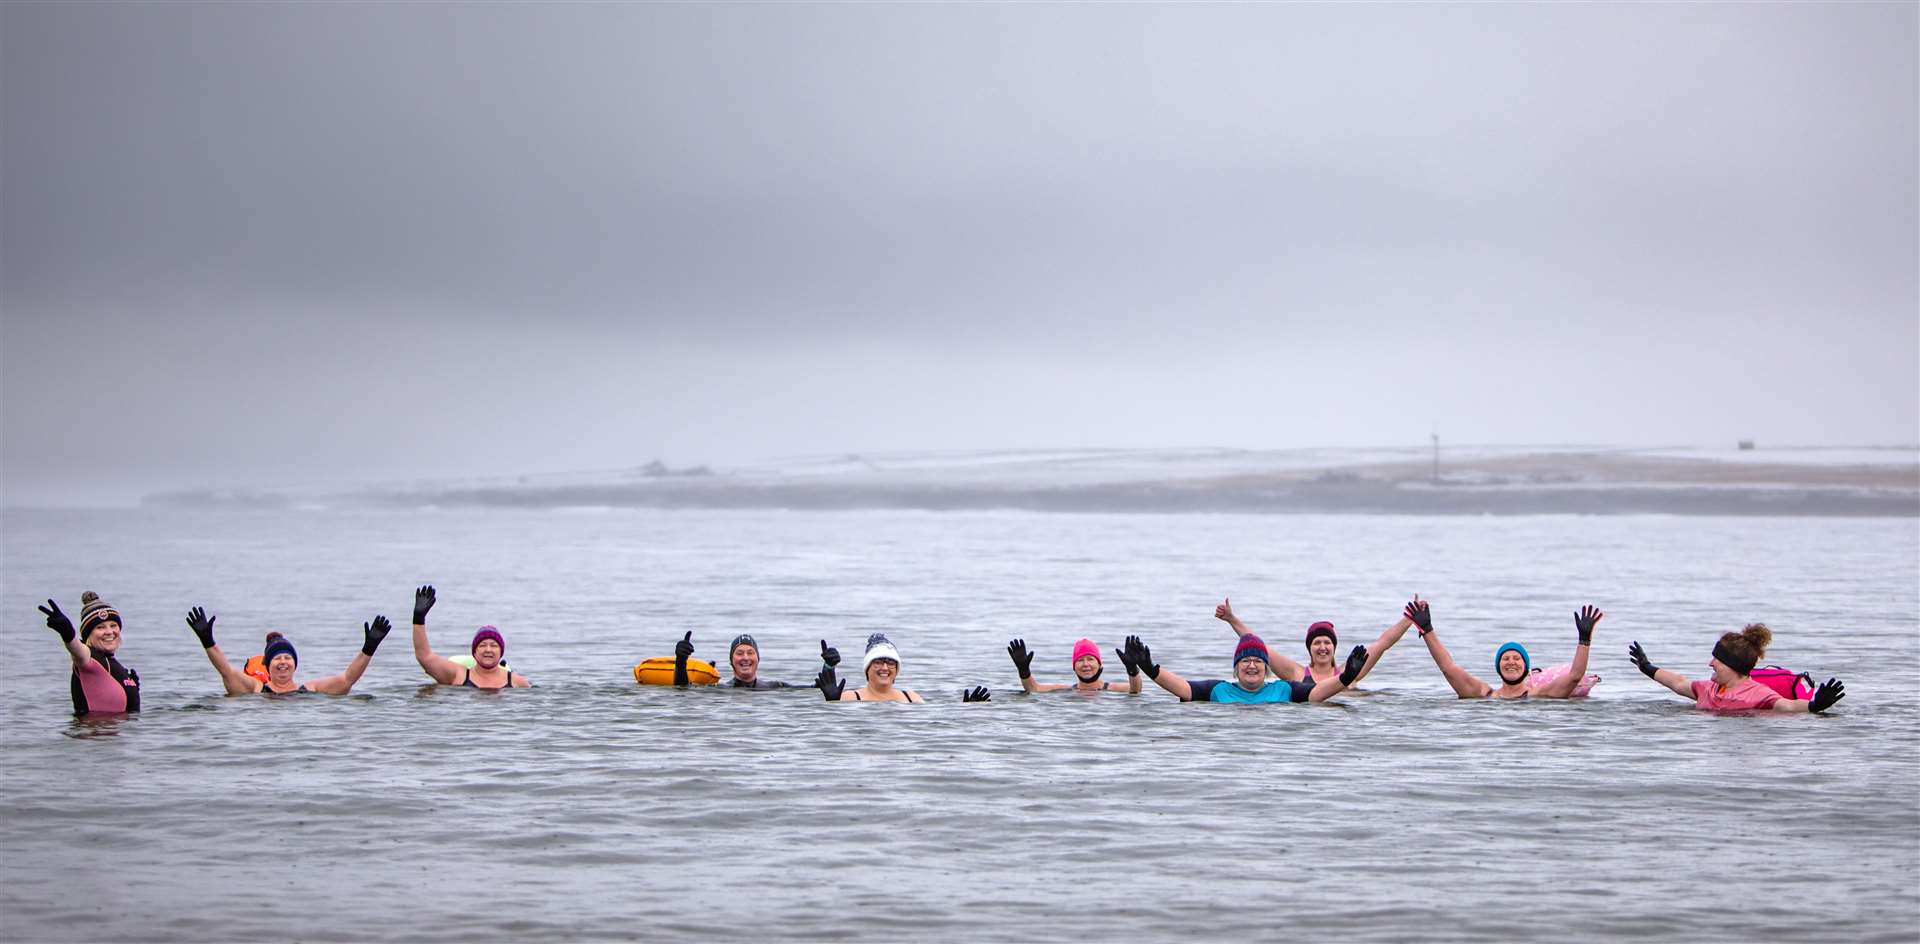 The group of New Year's Day swimmers at Scrabster. Picture: Karen Munro